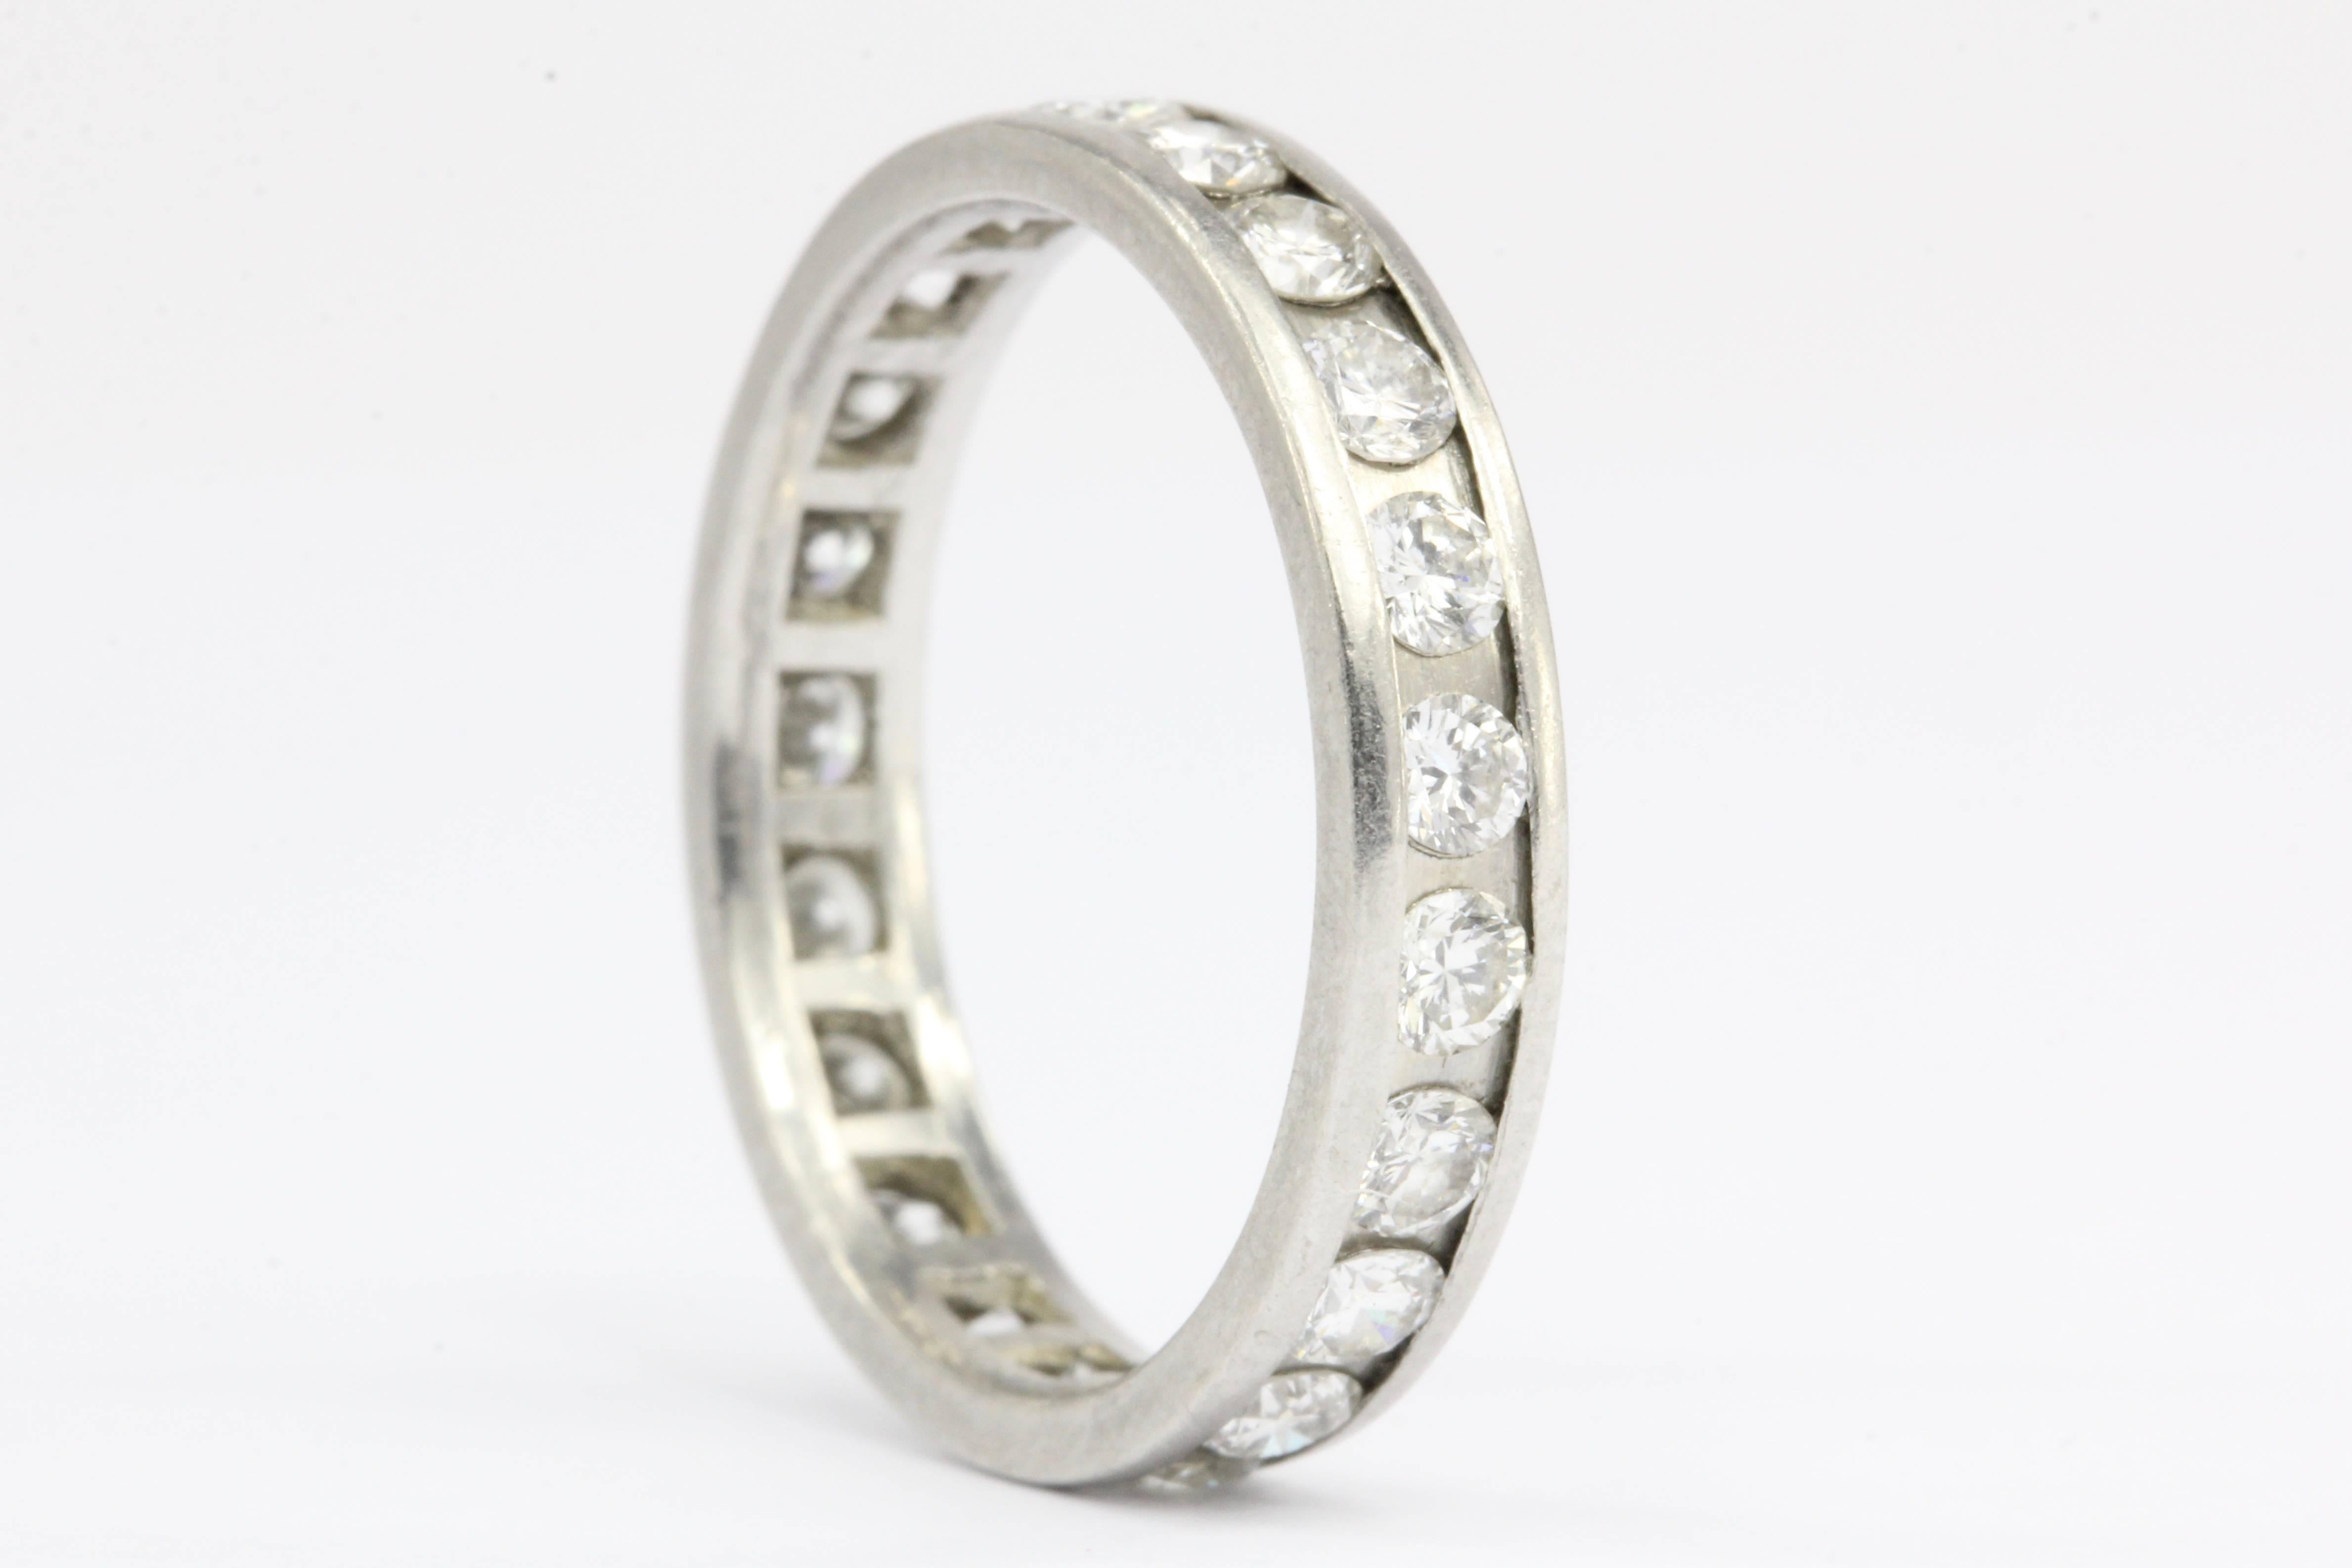 Era: Modern

Composition: Platinum

Primary Stone: Diamonds

Stone Carat: 1 CTW

Color: H/I

Clarity: Vs1/2

Band Width: 4 mm wide

Rise Above Finger: 1 mm thick

Ring Size: 6.25

Ring Weight: 4.04 grams

Ring Condition: Excellent estate condition.